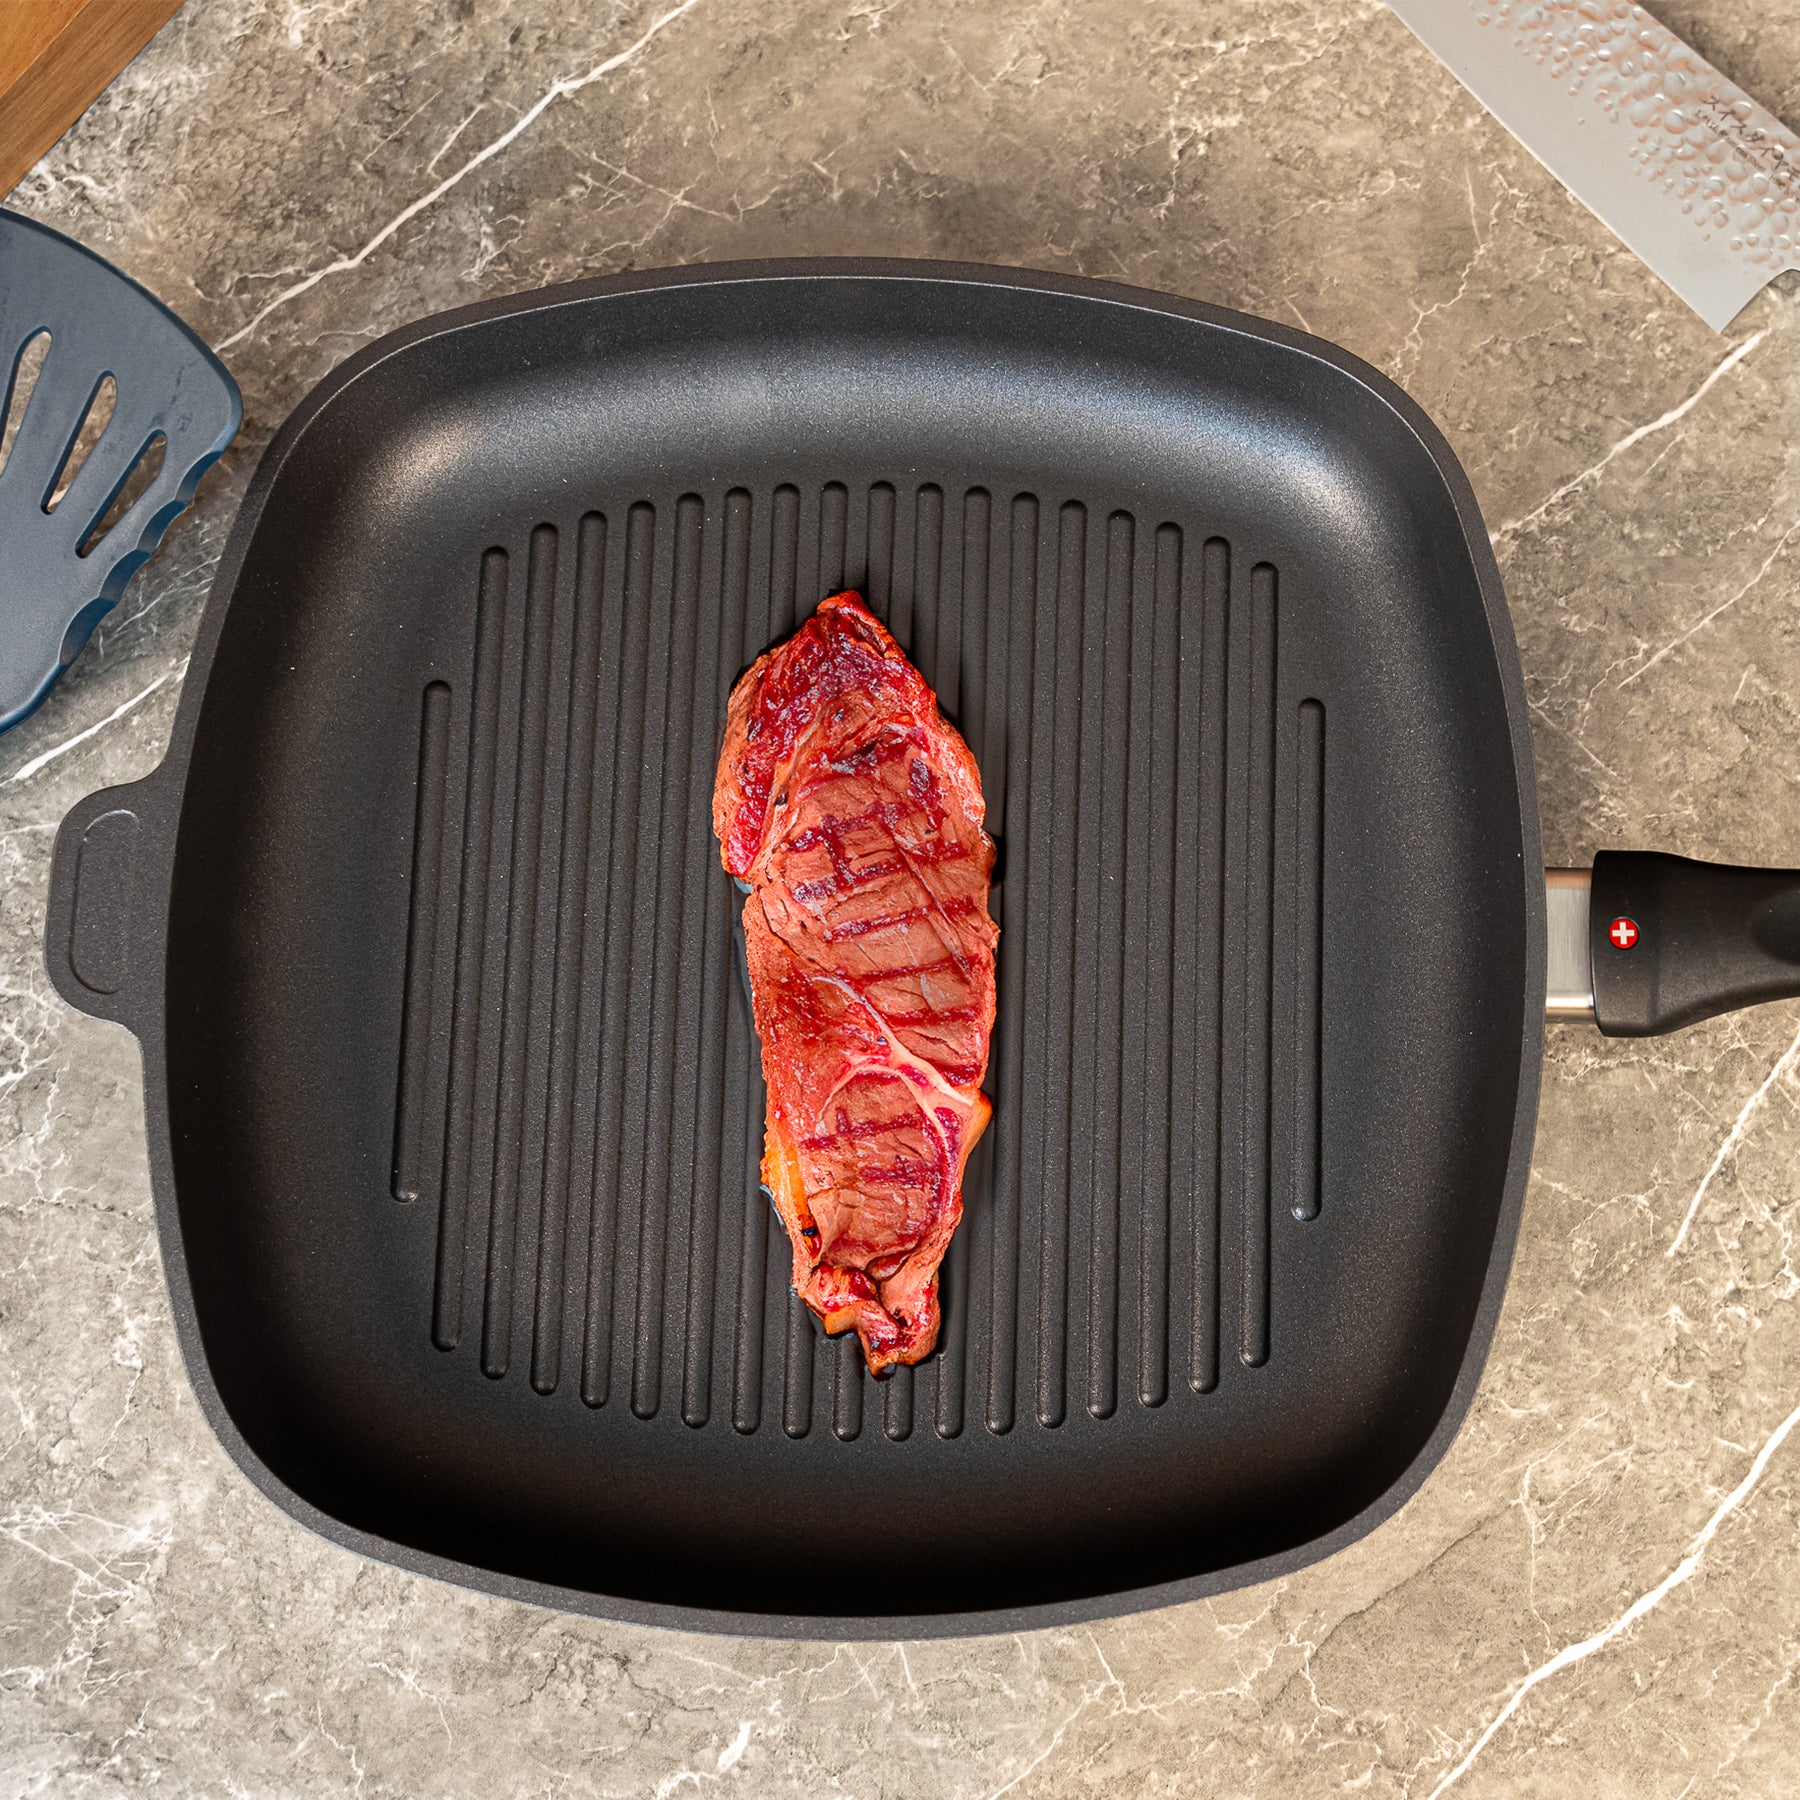 HD Nonstick 11" x 11" Square Grill Pan in use with meat on surface